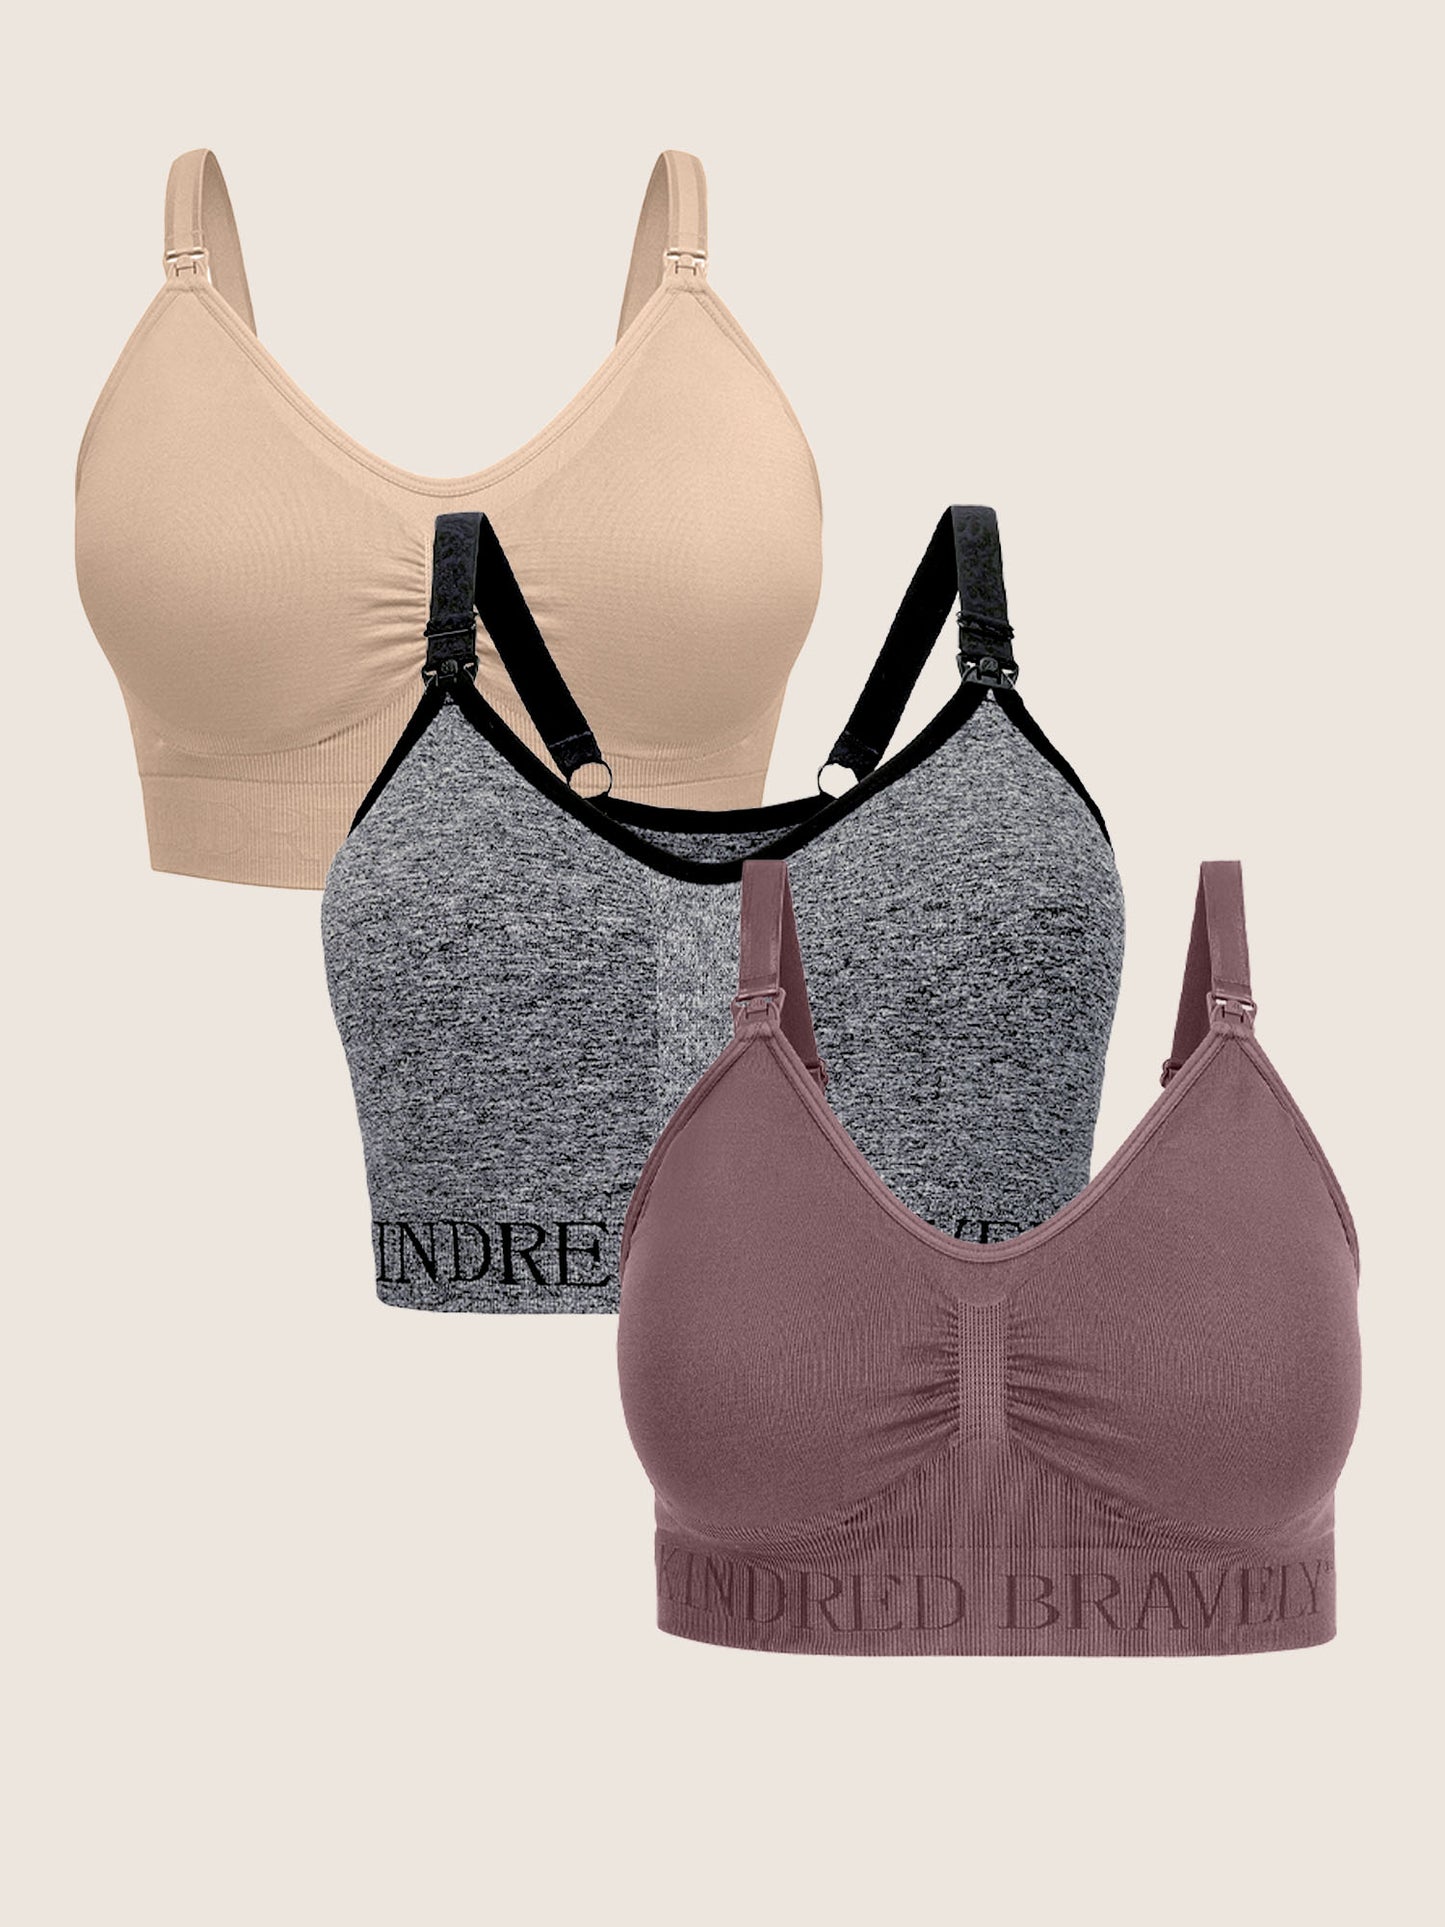 Nursing Bras in a three pack showing colors beige, heathered grey, and twilight.